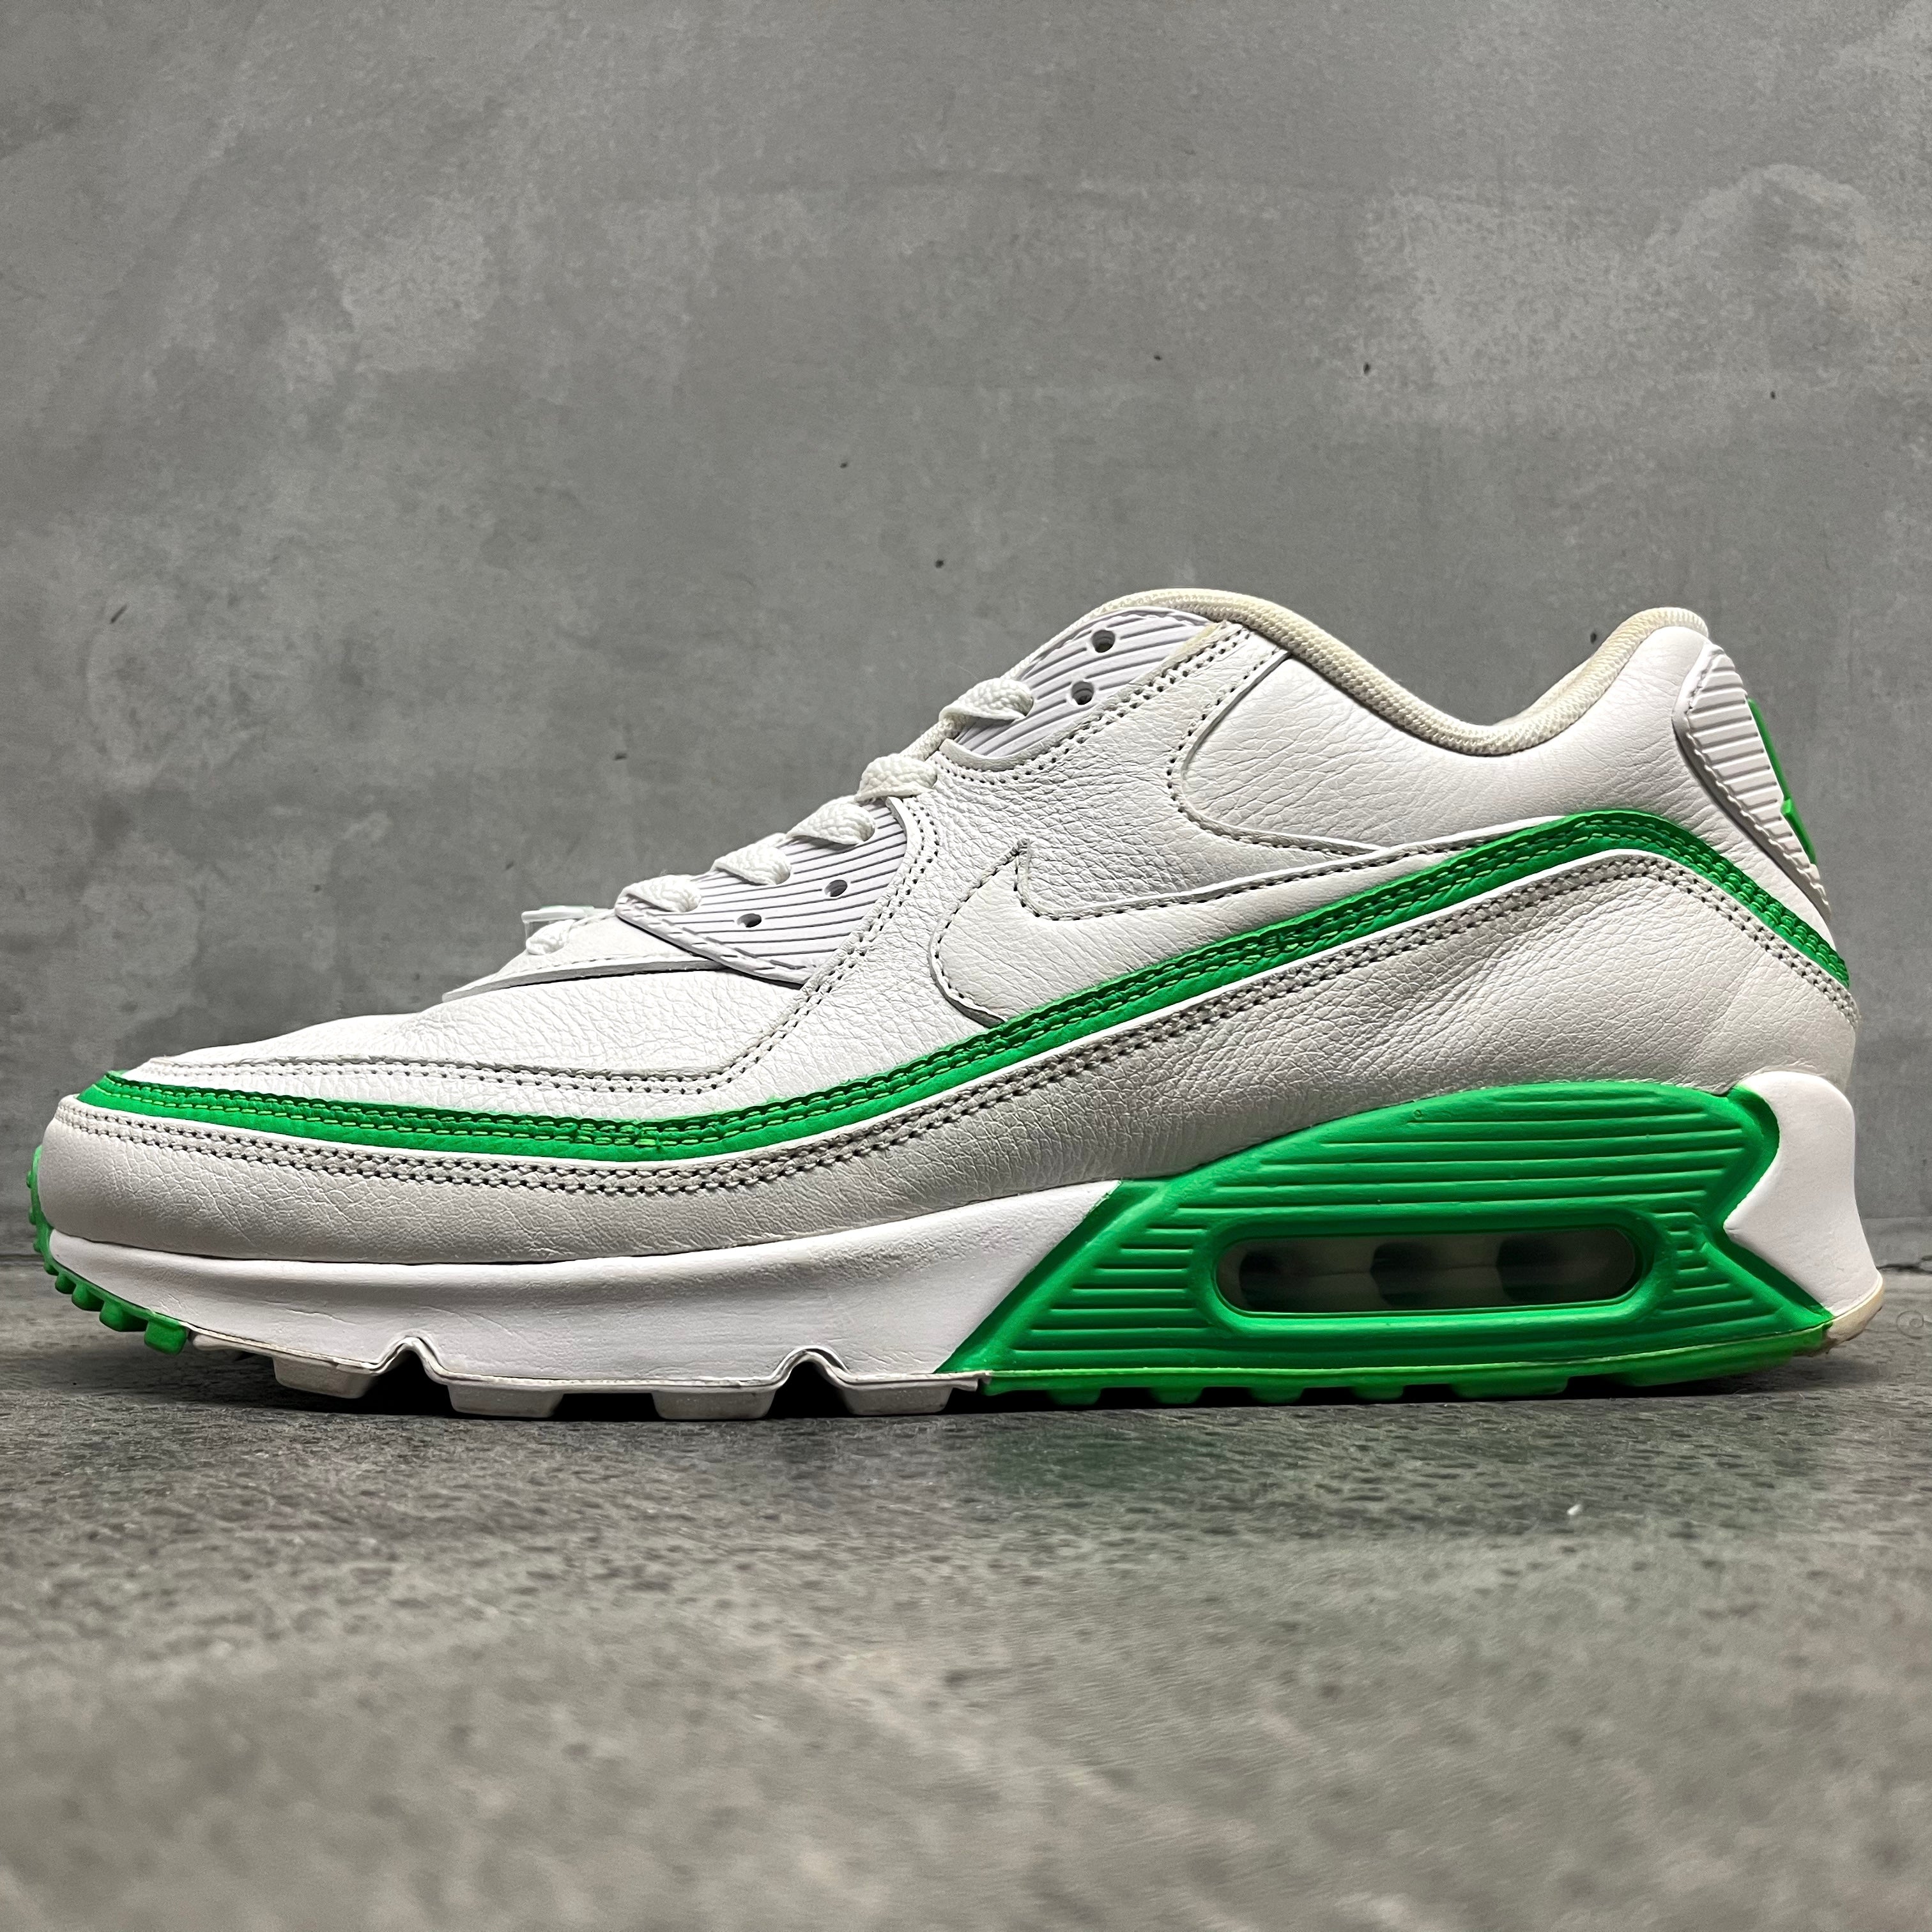 US.5NIKE AIR MAX  "Undefeated White Green" CJ